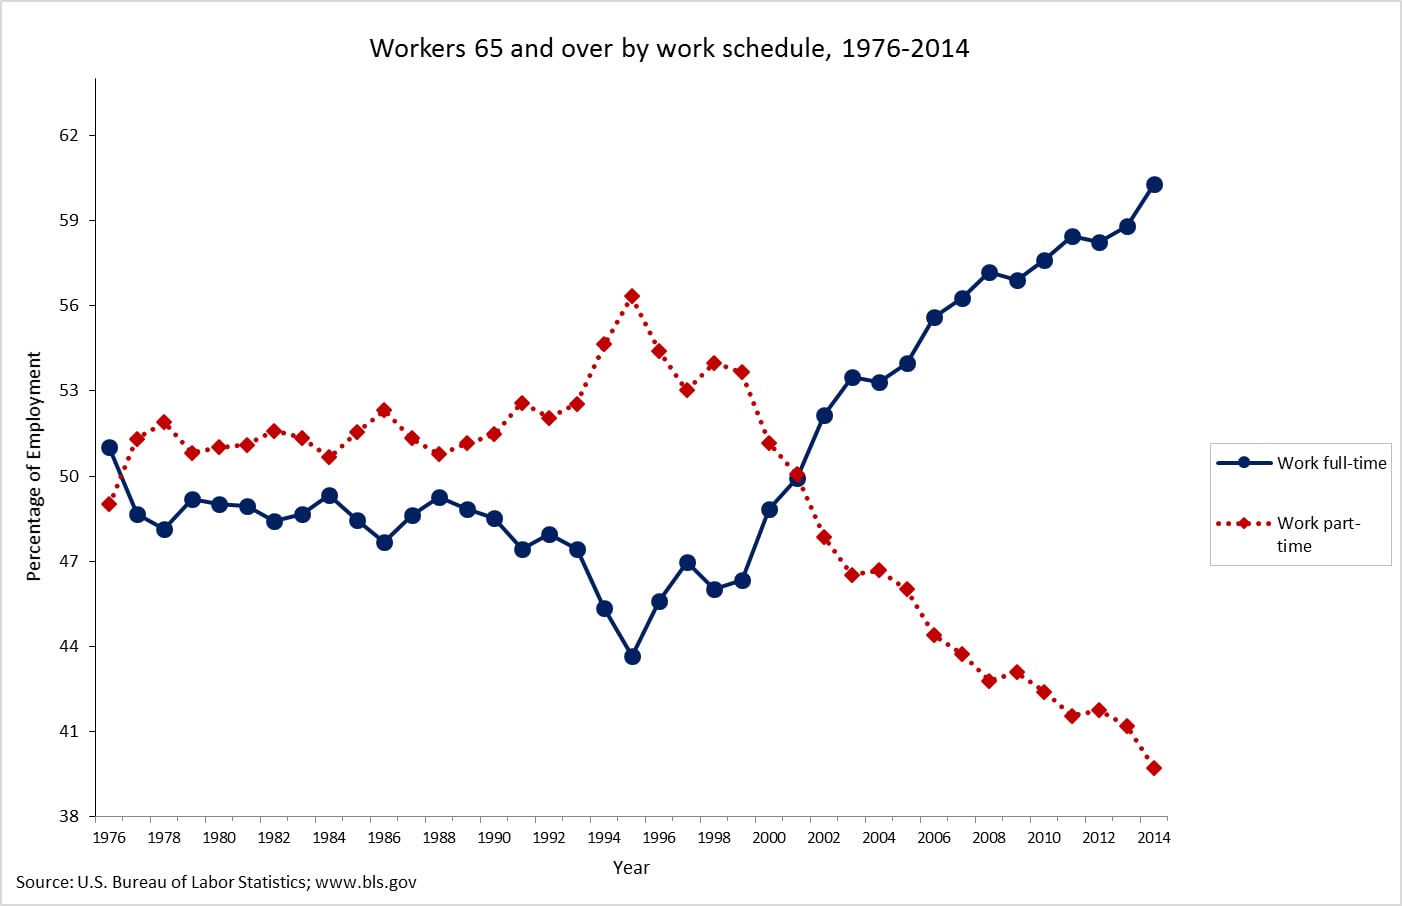 Chart showing that workers over age 65 are increasingly likely to be employed full-time rather than part-time.